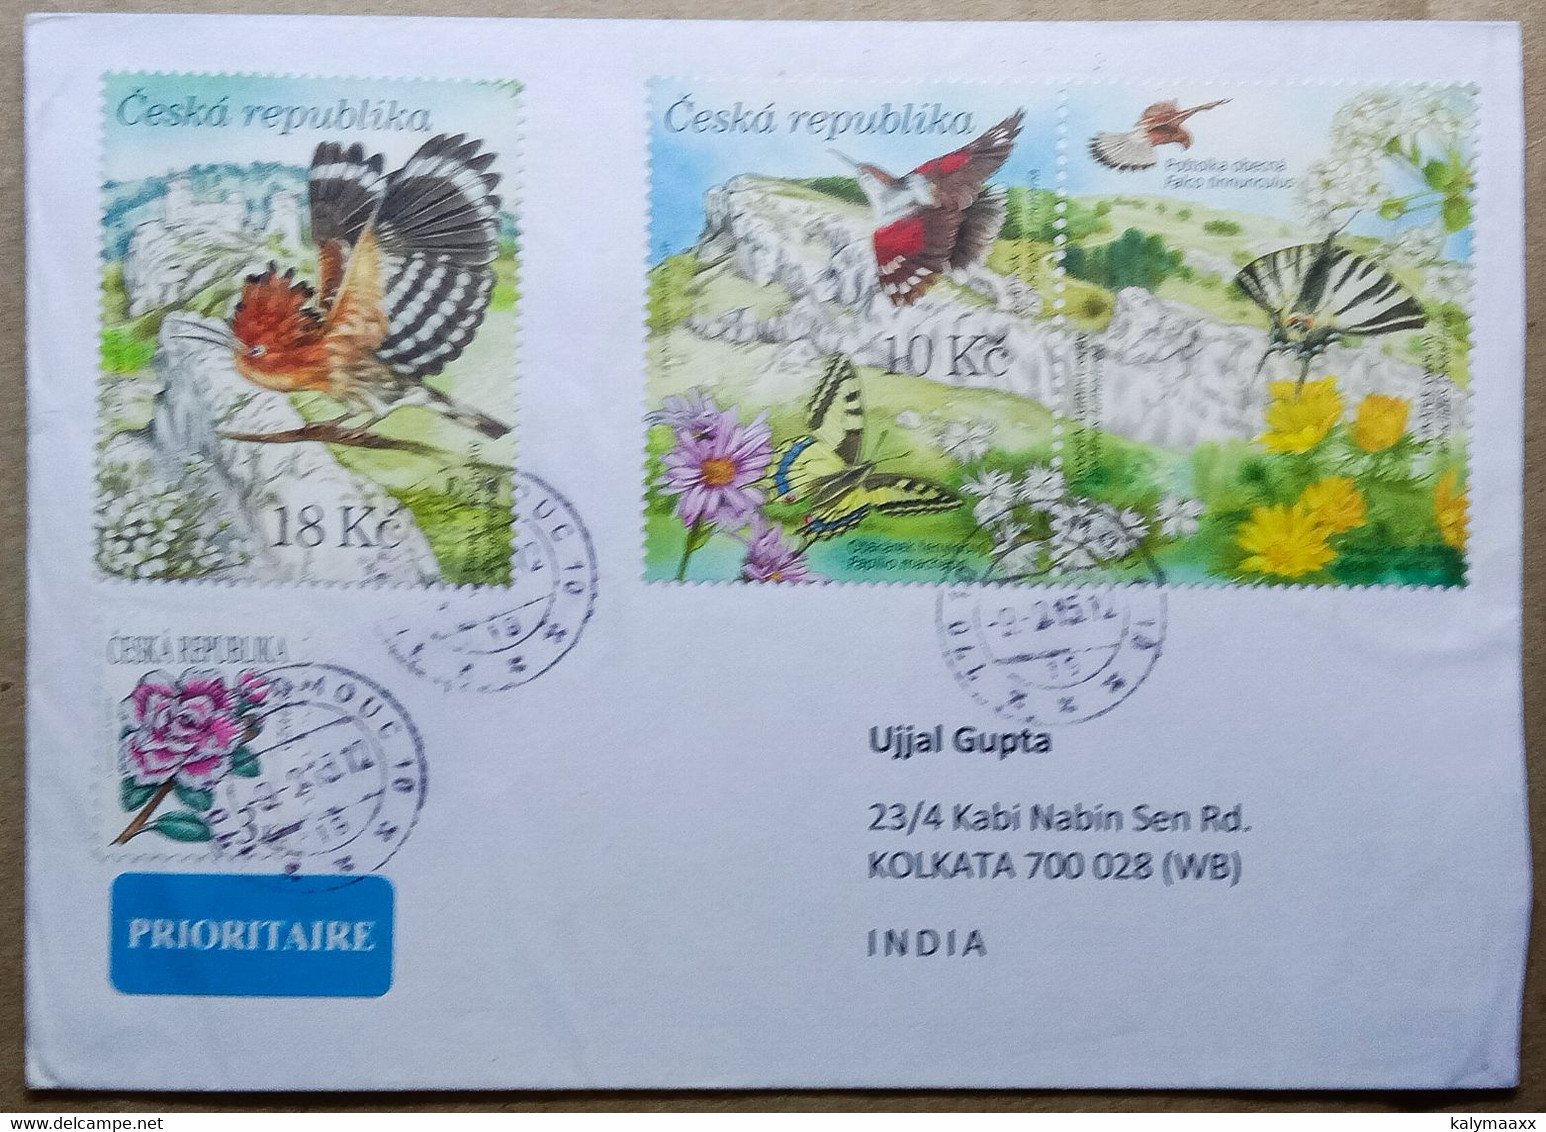 CZECH REPUBLIC TO INDIA 2012 COMMERCIAL USED COVER, BIRDS, BUTTERFLY, FLOWERS, FLORA & FAUNA - Lettres & Documents